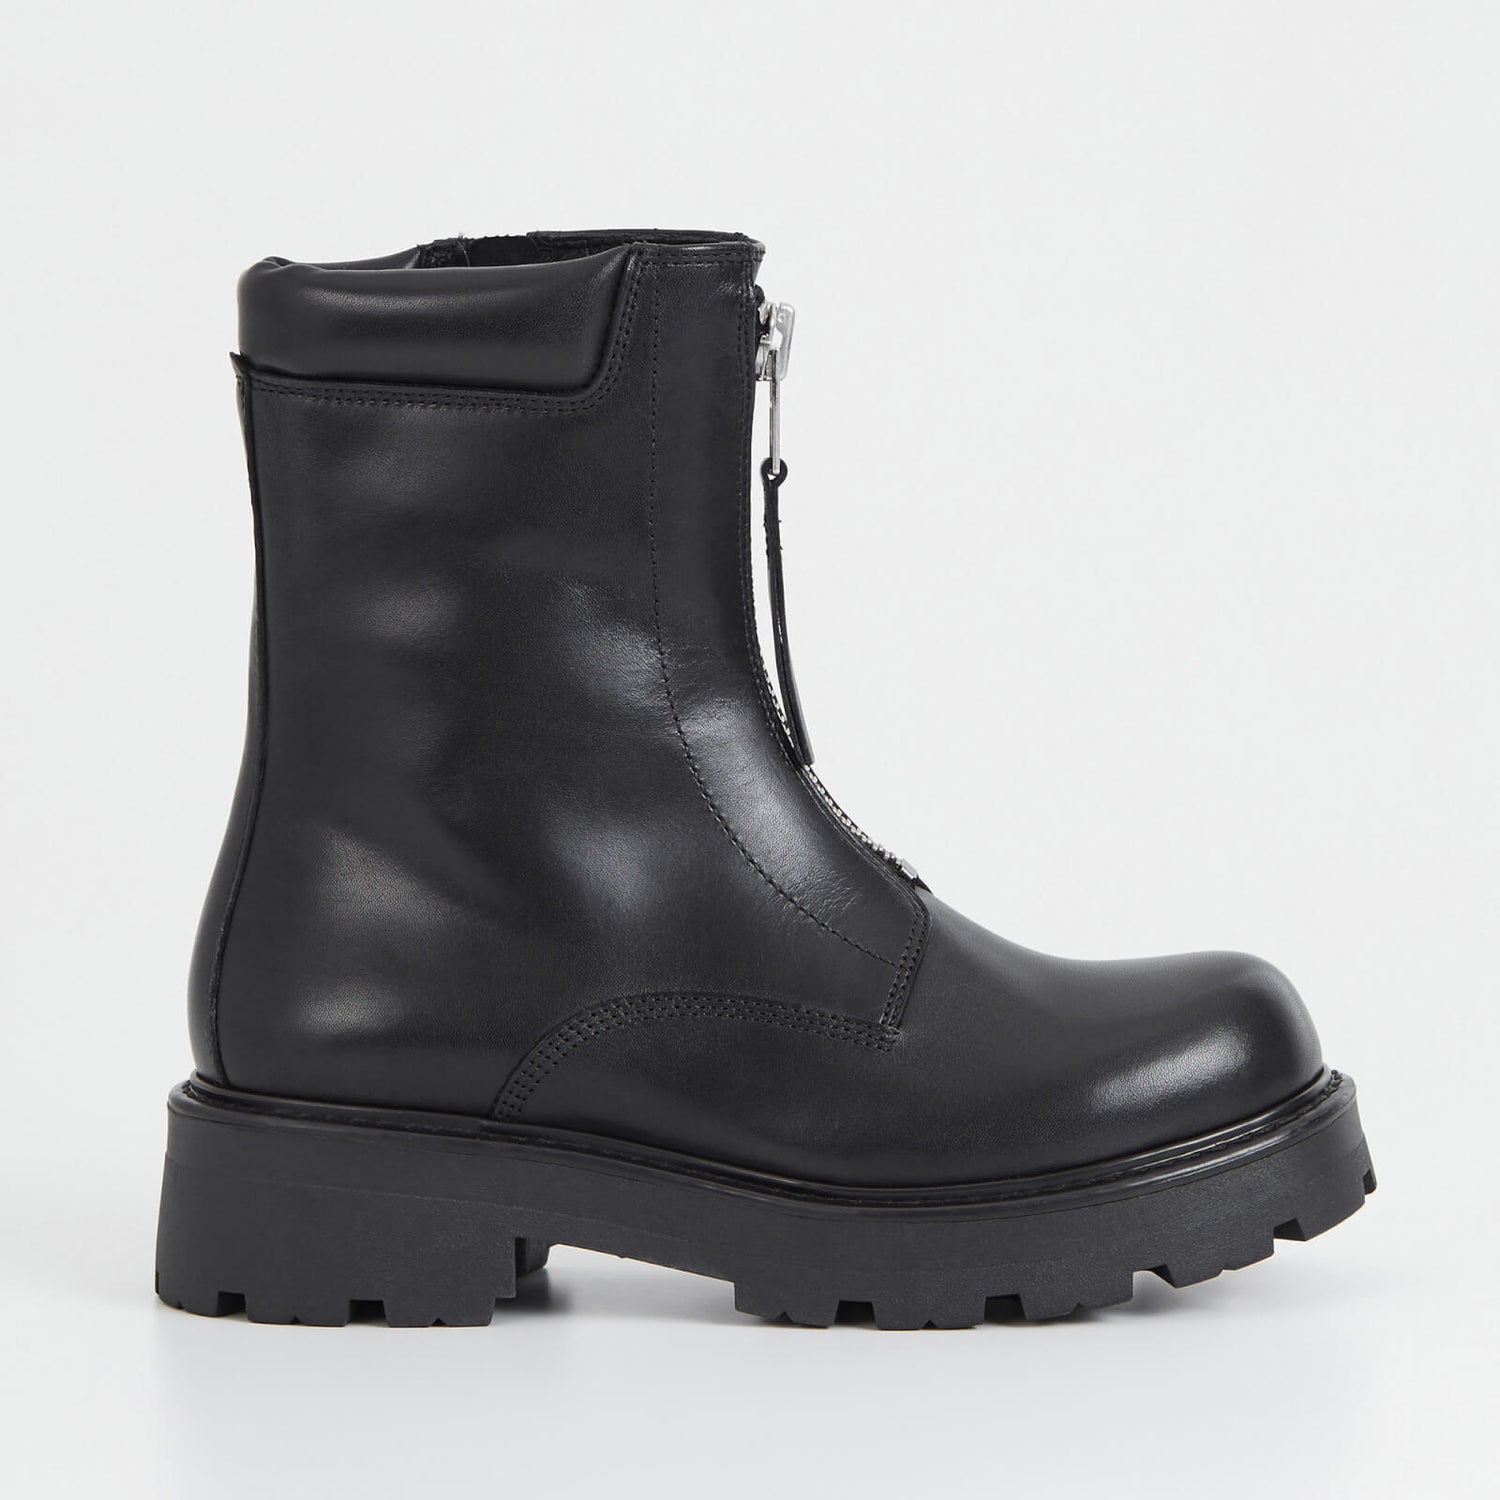 Vagabond Cosmo 2.0 Leather Boots - UK 3